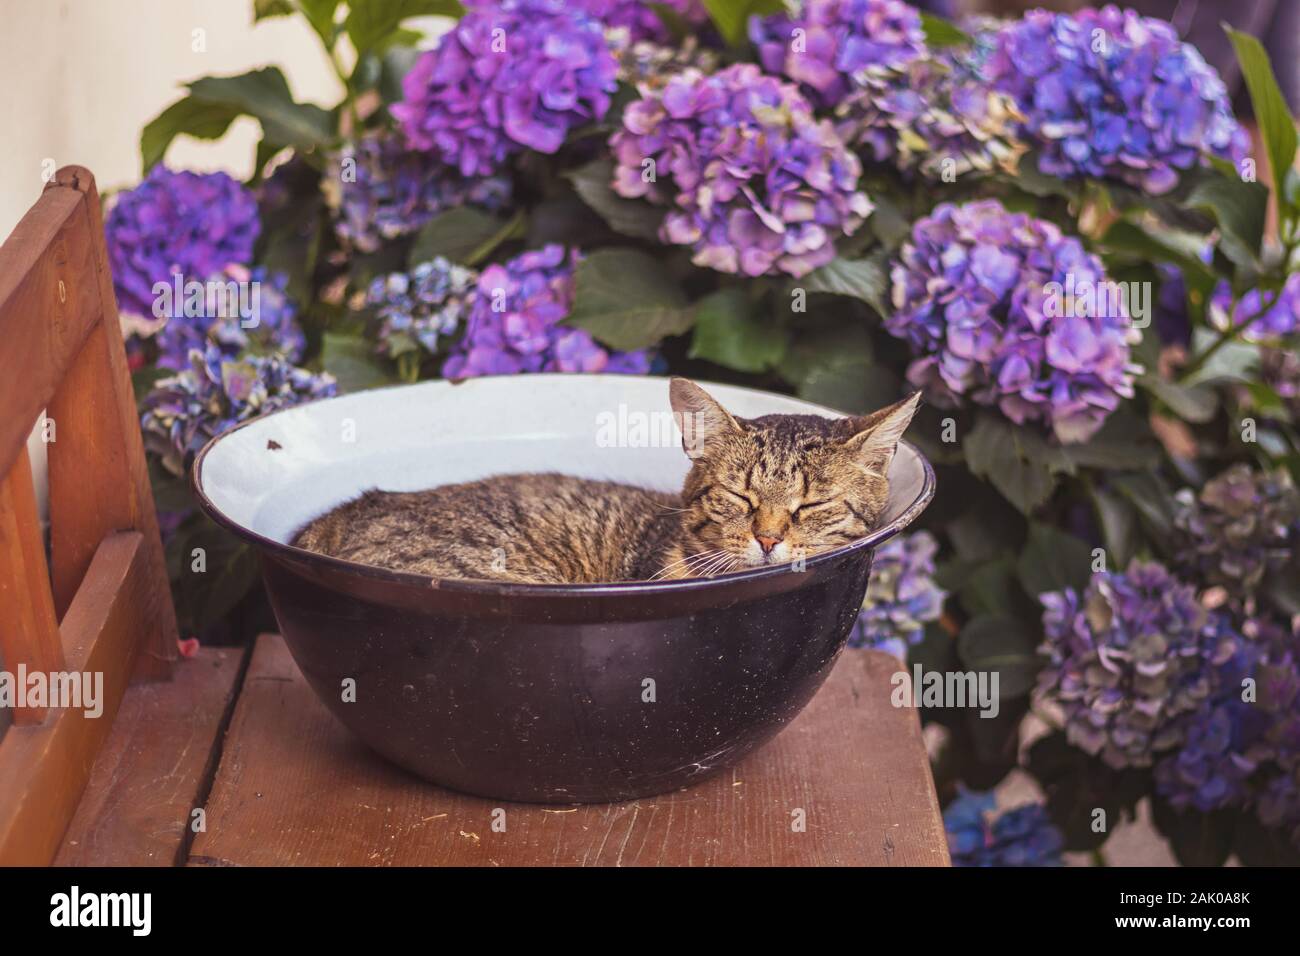 Tabby cat sleeping in a bowl on a wooden bench (in the garden), surrounded by blue and purple hydrangea flowers Stock Photo